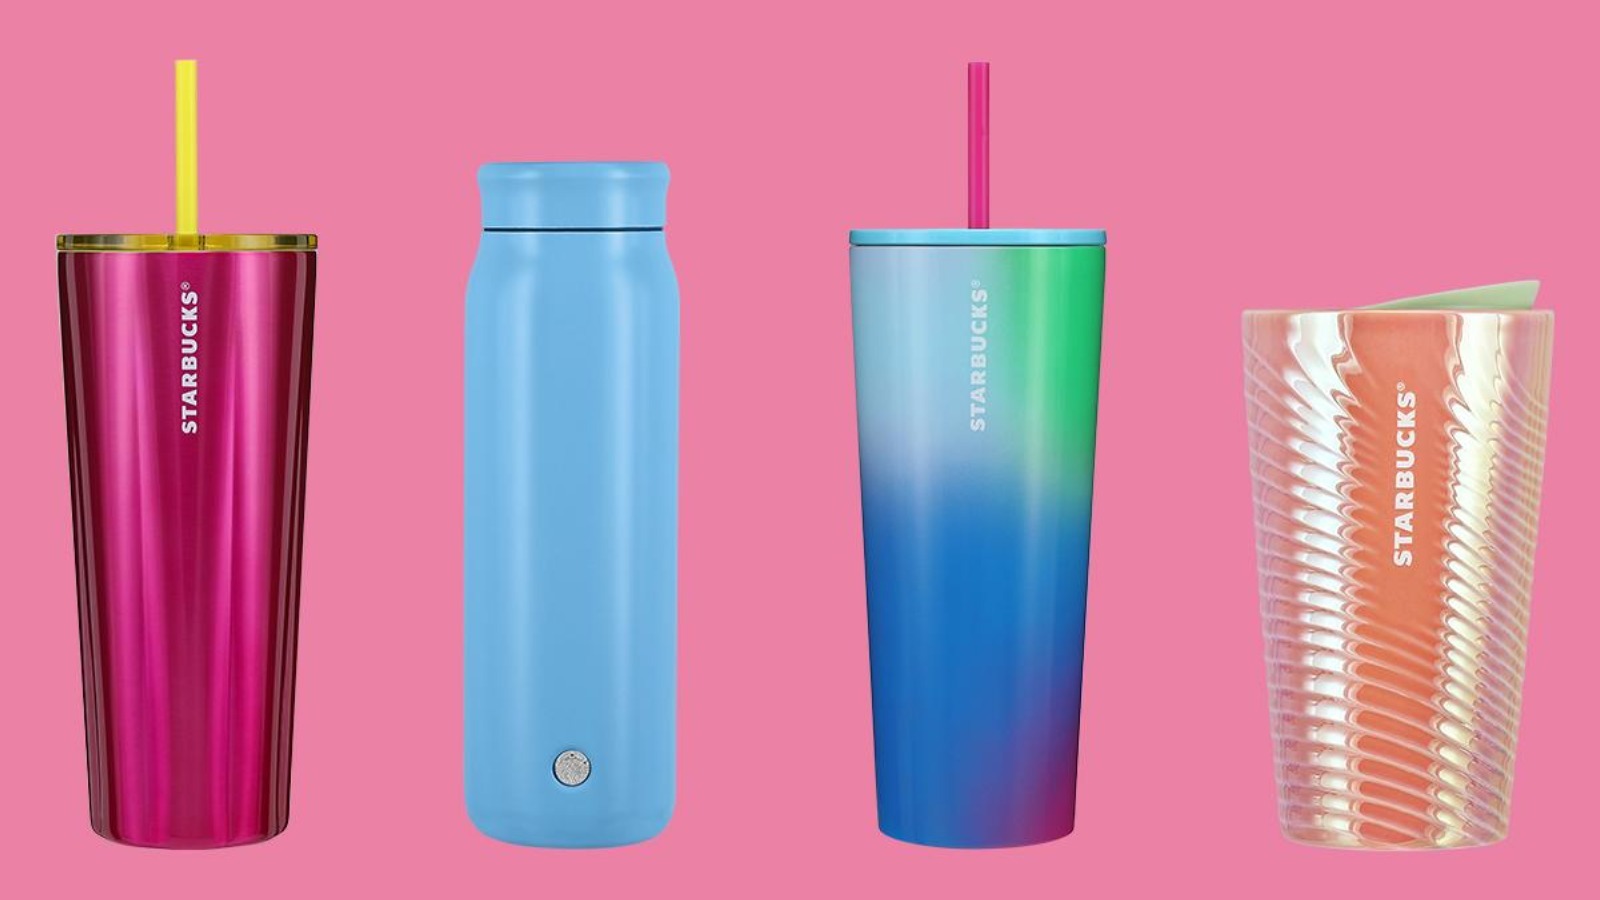 https://www.tastingtable.com/img/gallery/starbucks-new-summer-cups-come-in-bright-sunny-hues/l-intro-1683655588.jpg